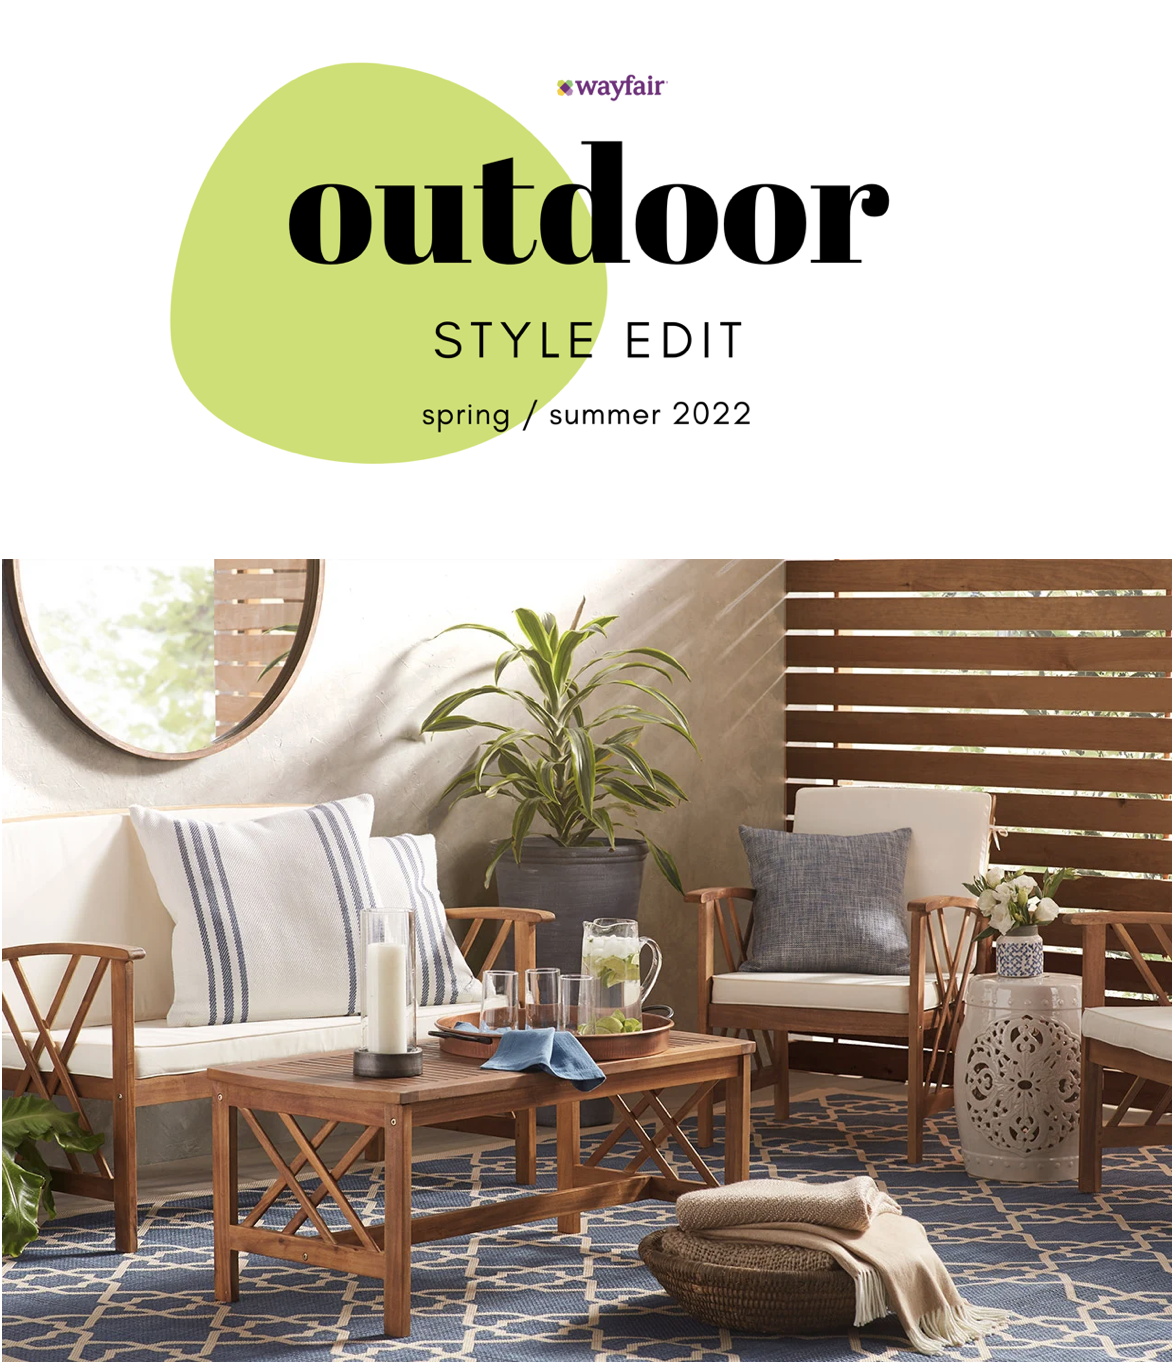 Outdoor Style Edit With Wayfair /// By Design Fixation #patio #backyard #trends 